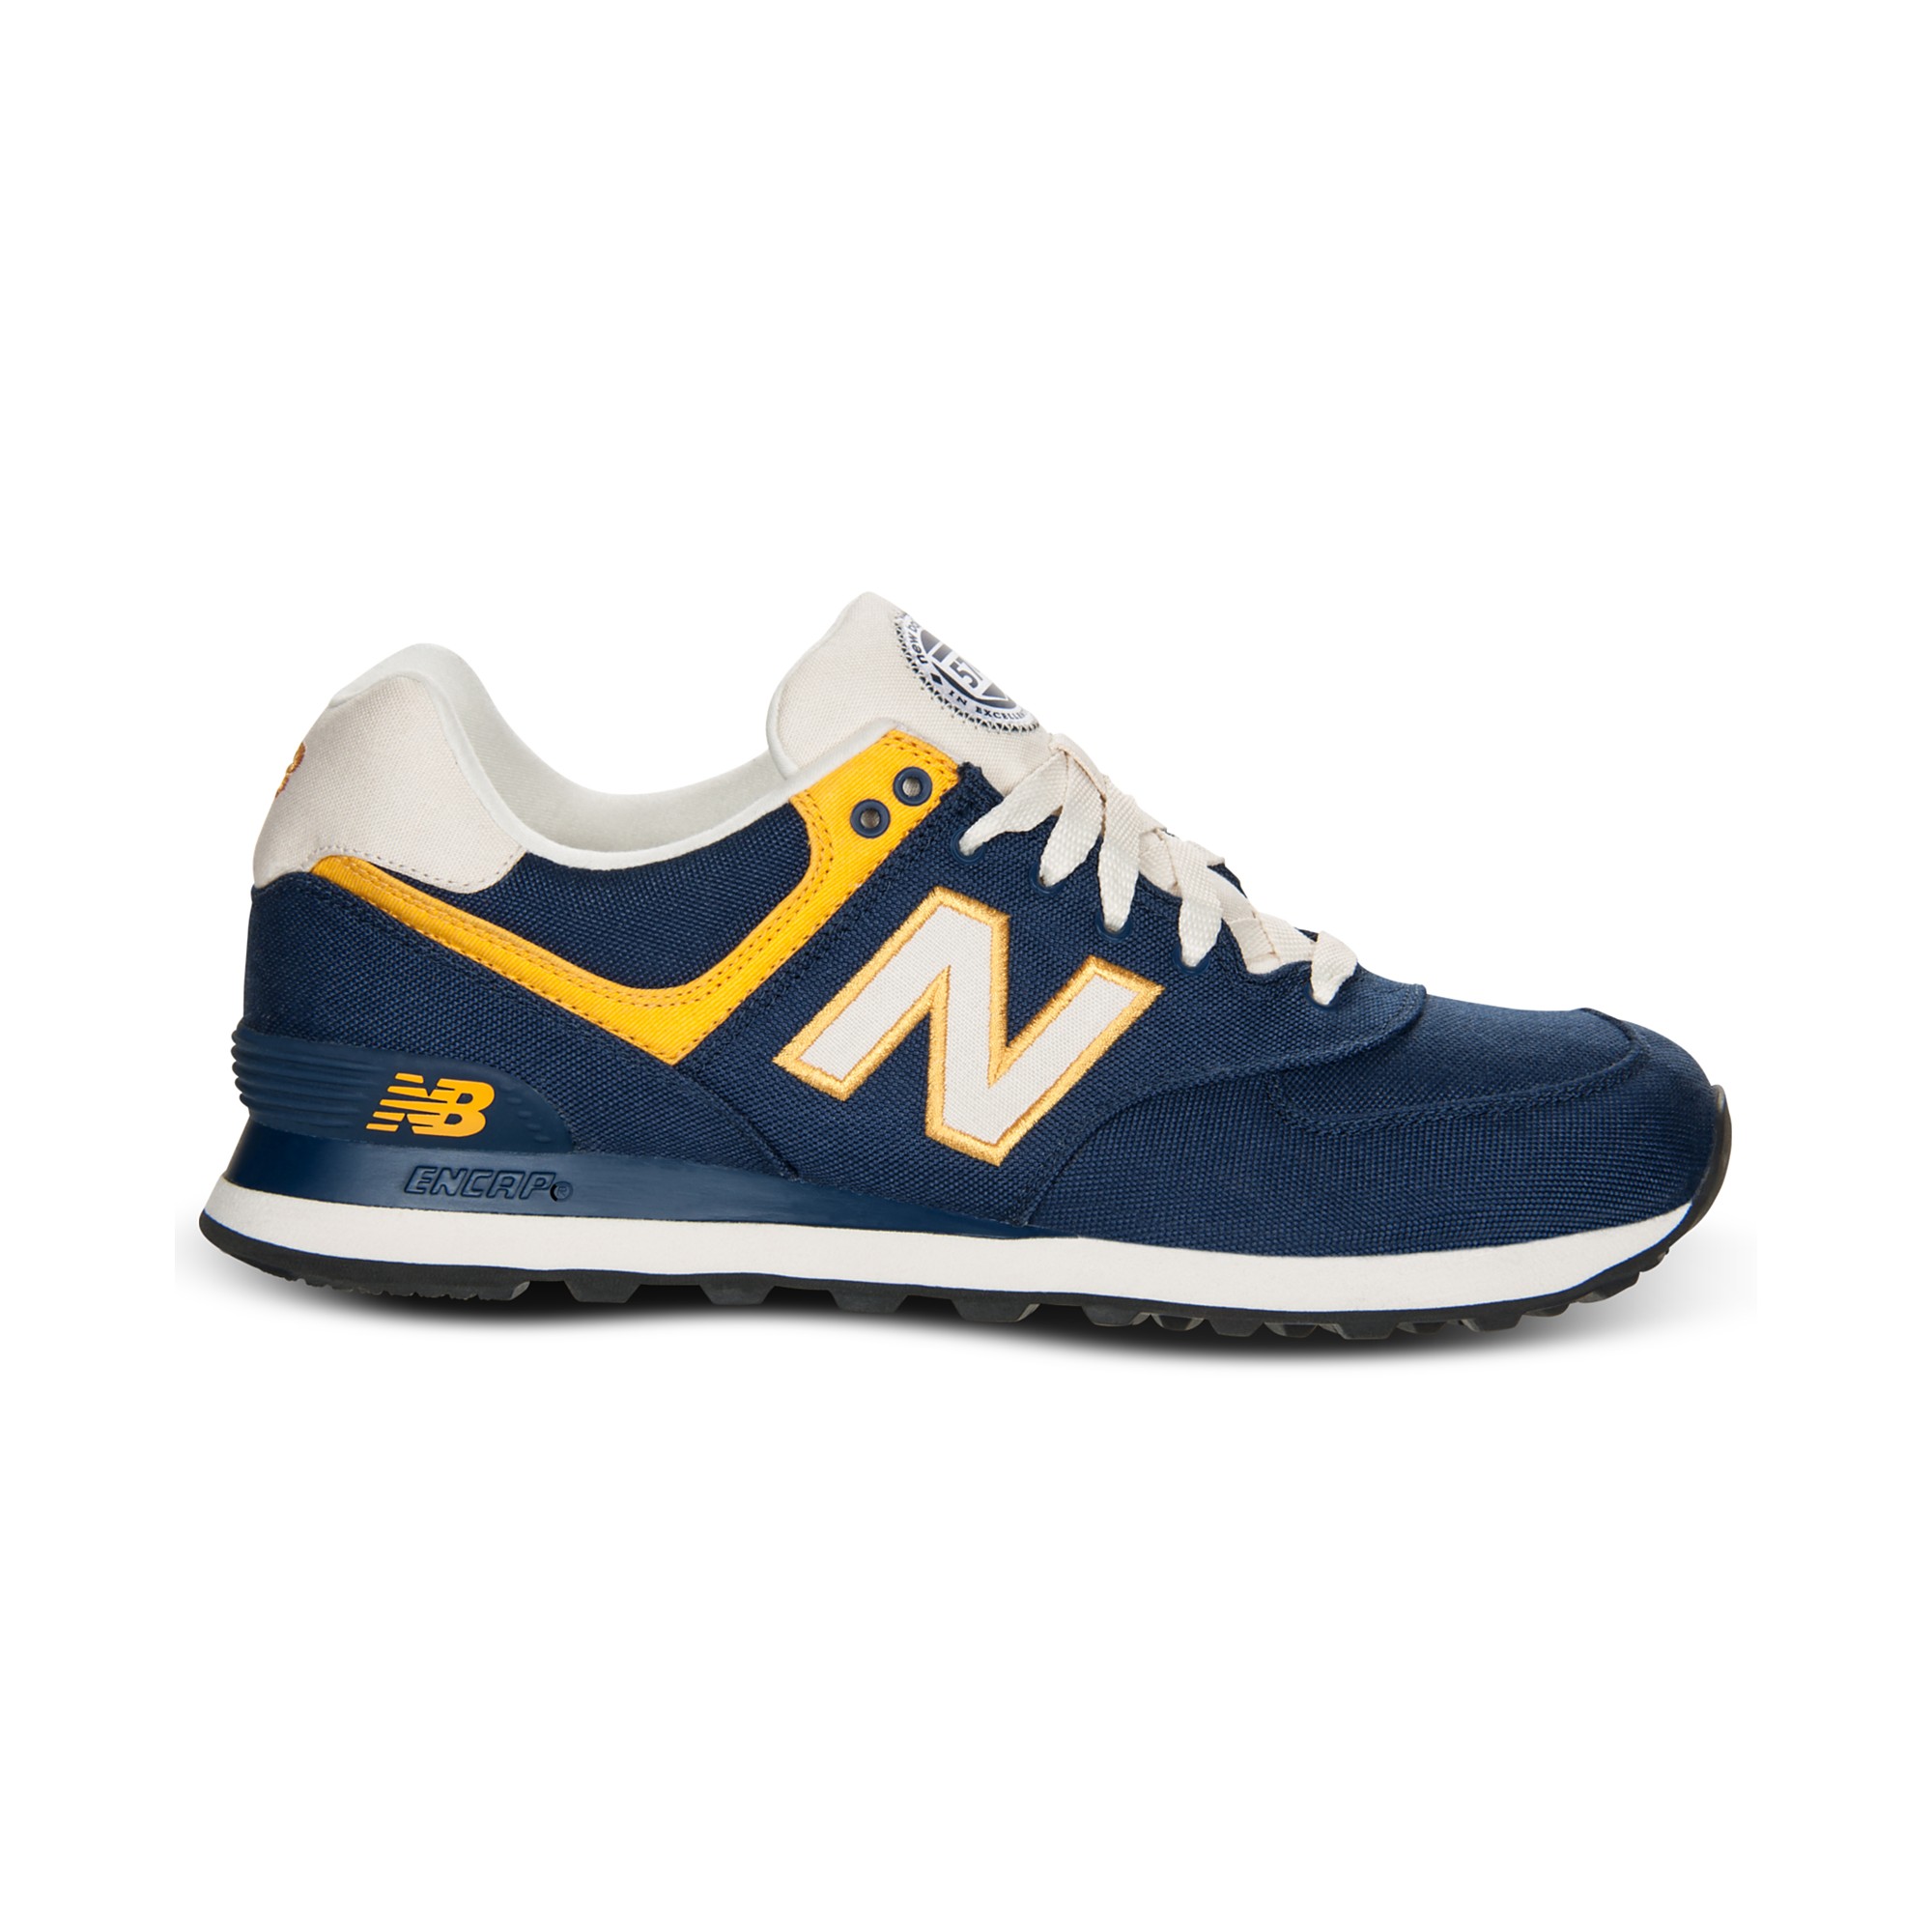 New Balance 574 Sneakers in Navy/Yellow (Blue) for Men - Lyst